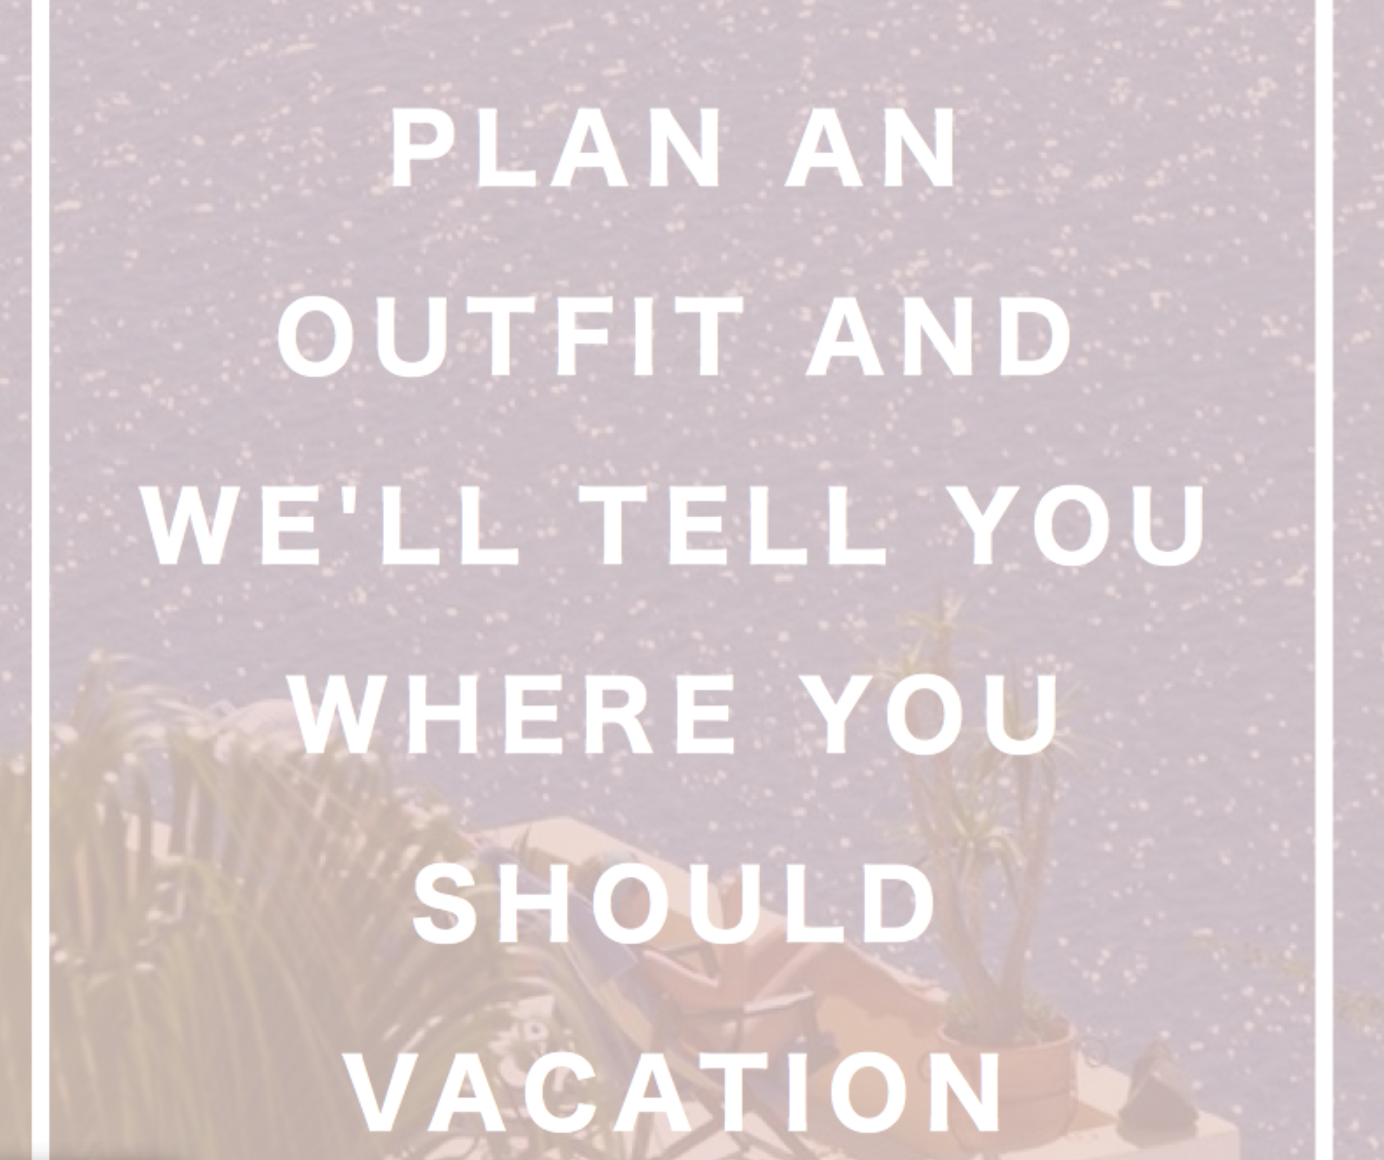 Plan an Outfit and We'll Tell You Where You Should Vacation